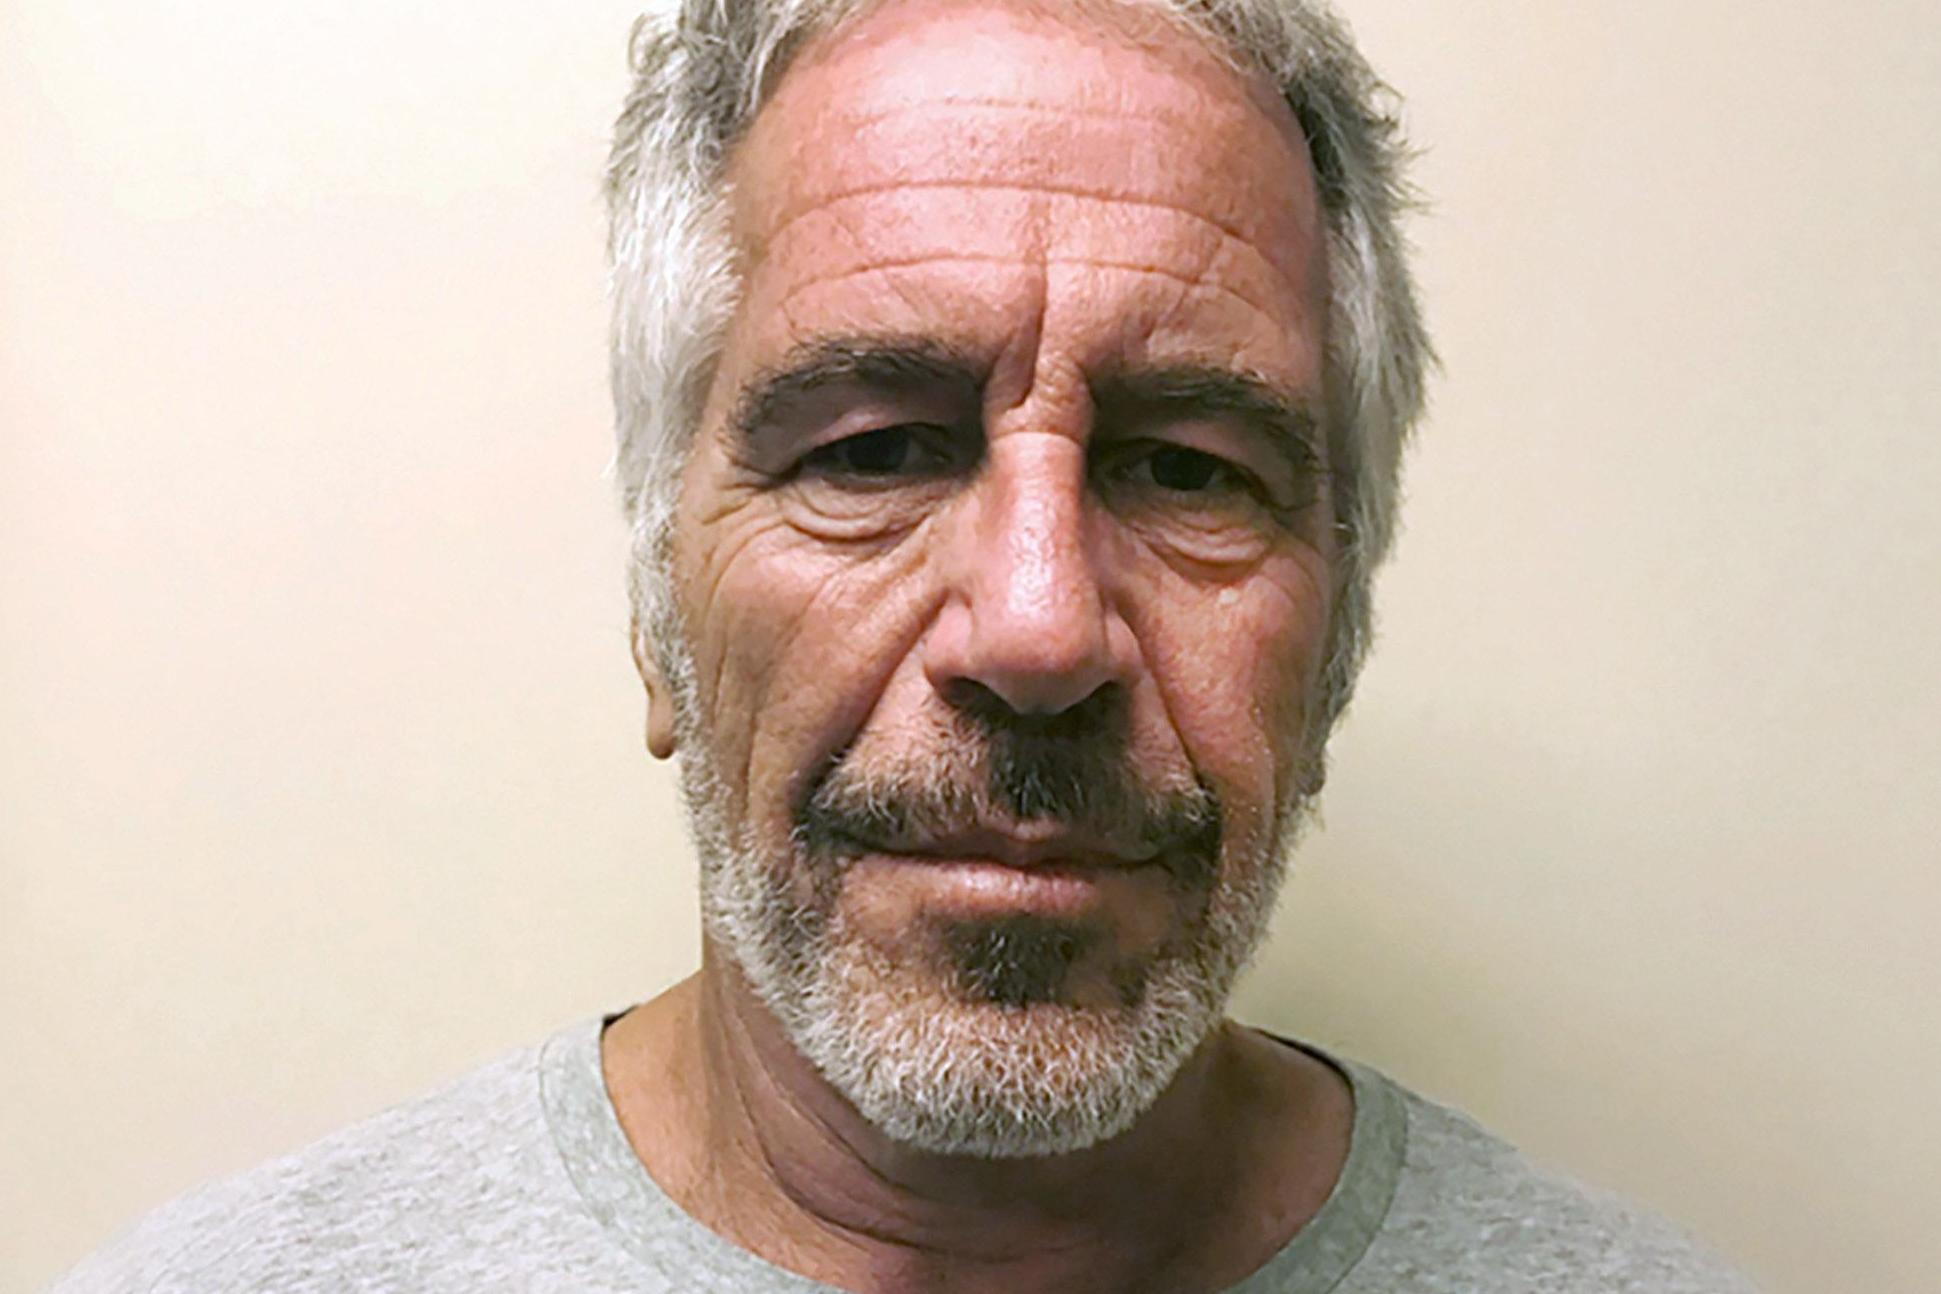 From Ghislaine Maxwellâ€™s â€˜veneer of respectabilityâ€™ to a â€˜creepyâ€™ birthday song: Most startling moments in Lifetimeâ€™s Surviving Jeffrey Epstein documentary - The Independent